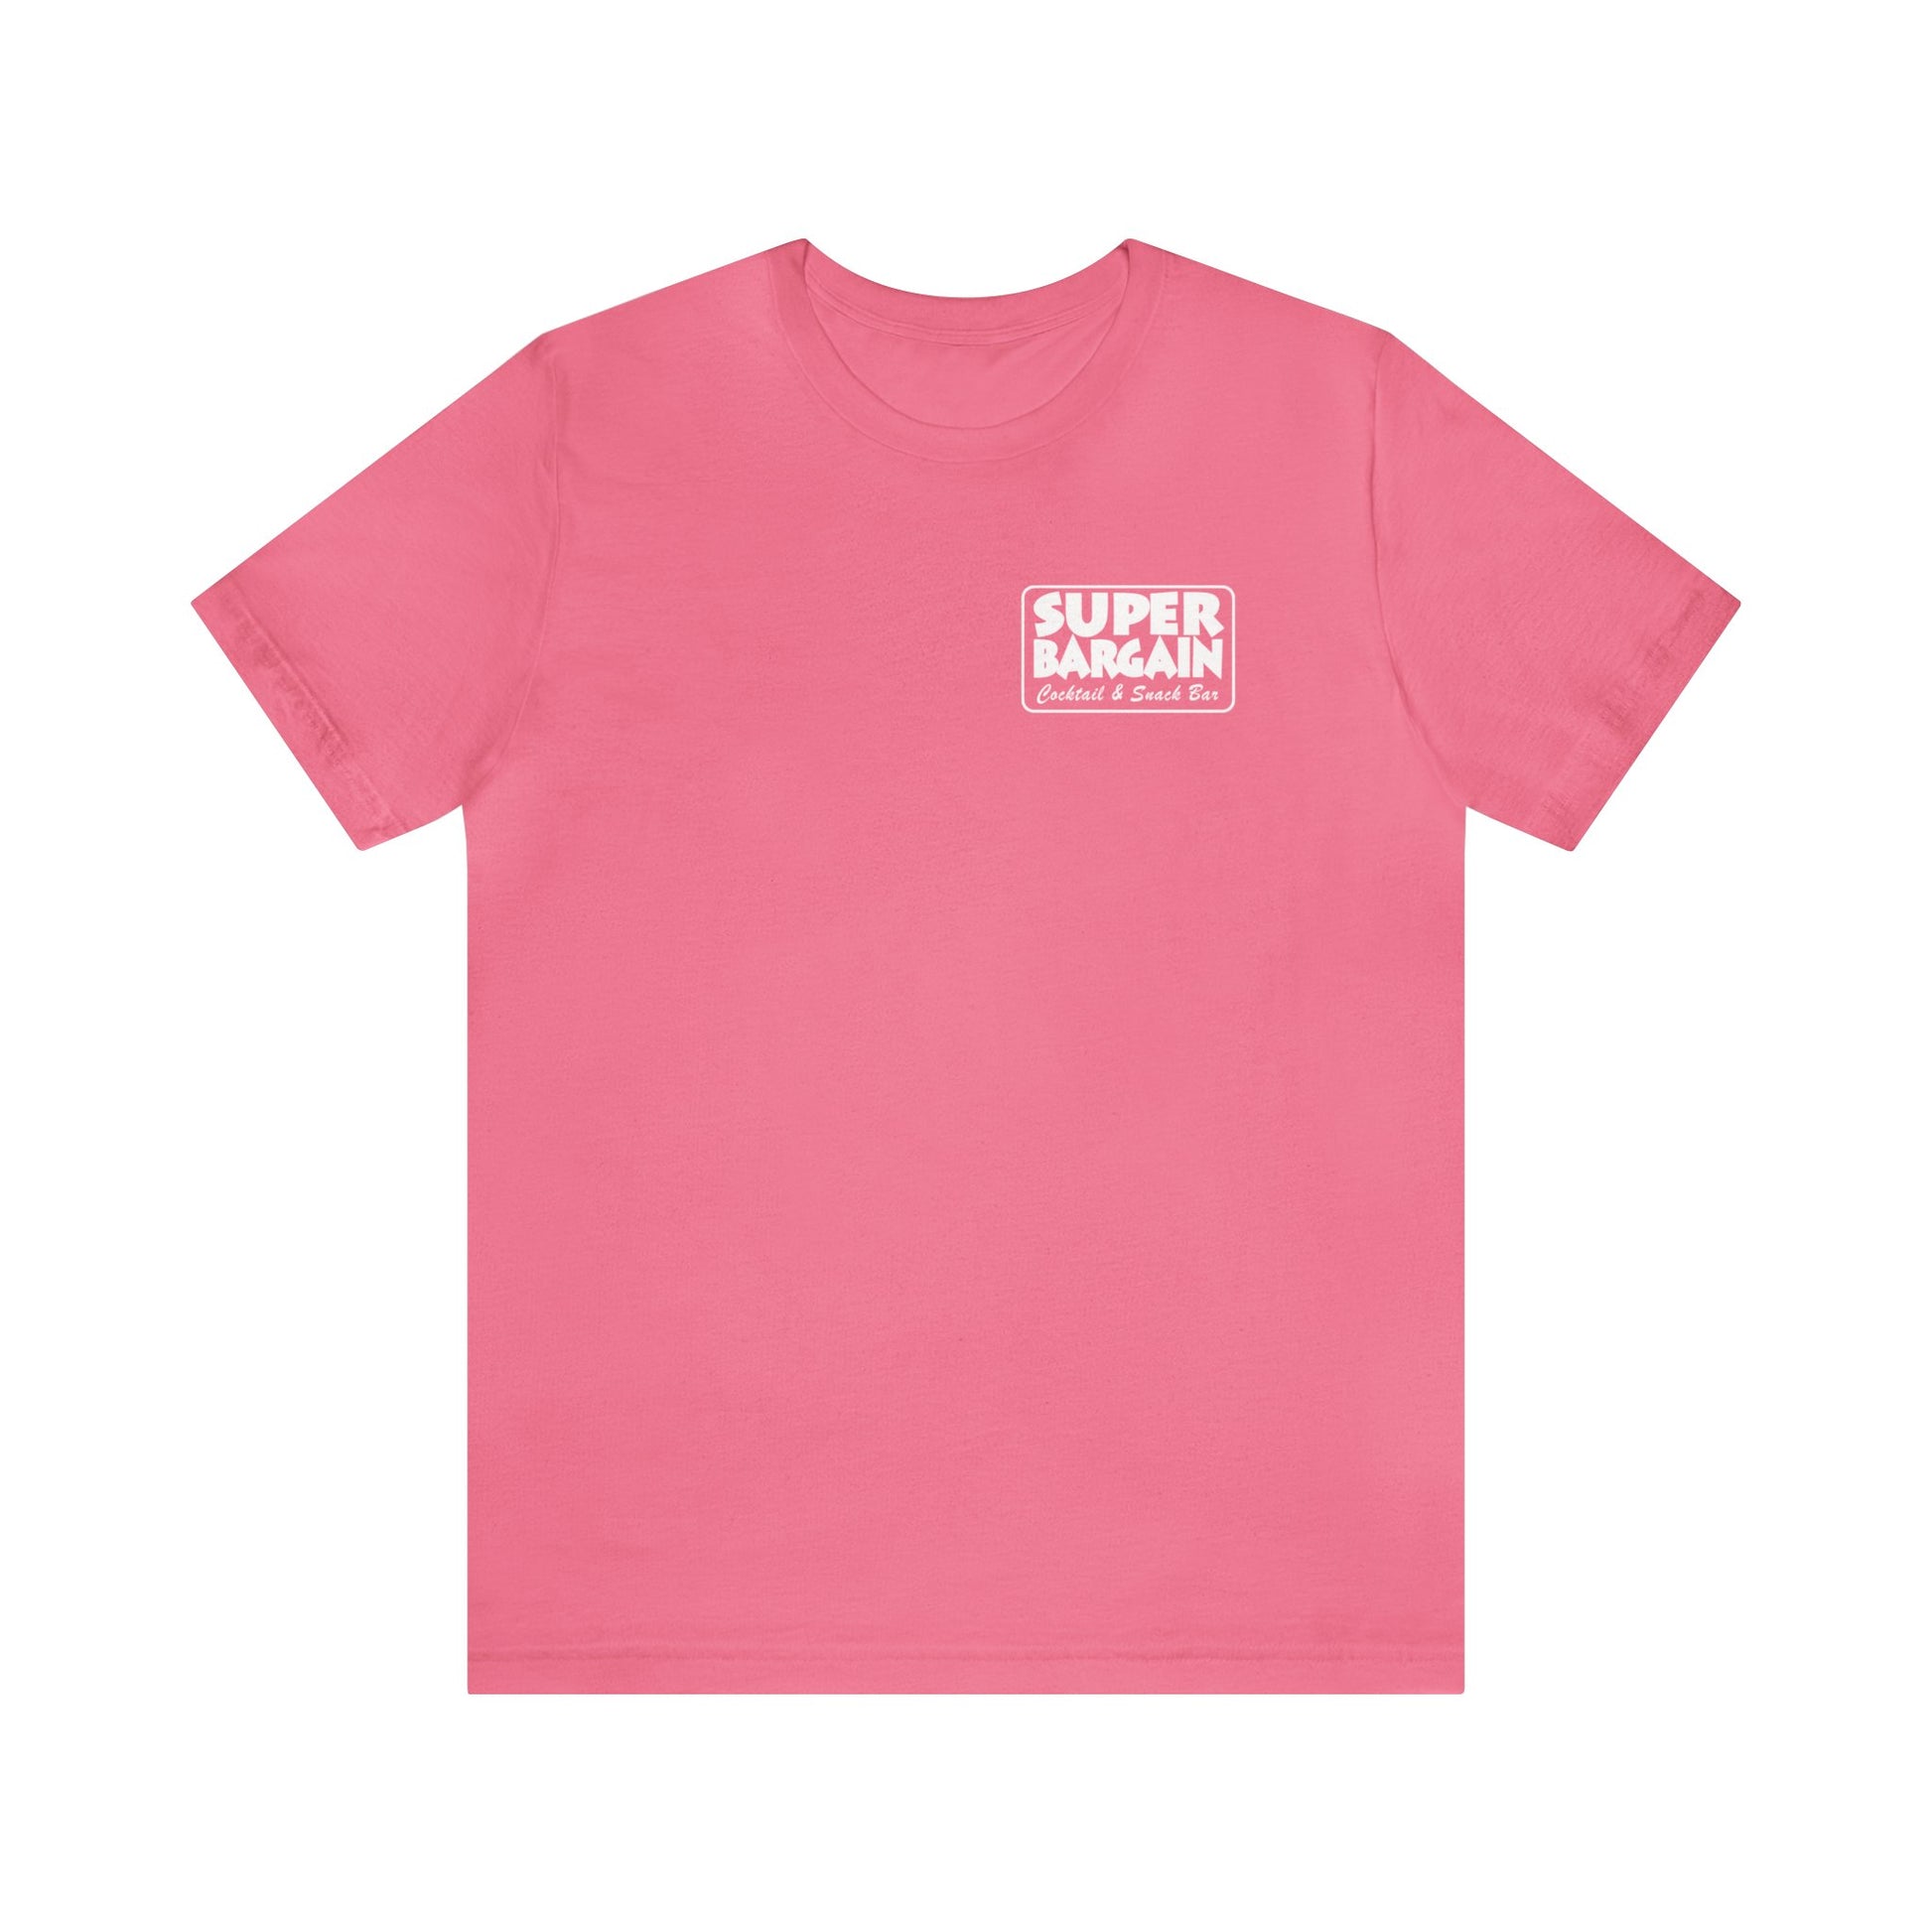 A pink Unisex Jersey Short Sleeve Monochrome Logo Tee with the logo "SUPER BARGAIN TORONTO" in bold red and white text on the left chest area. The shirt is displayed against a white background. (Printify)